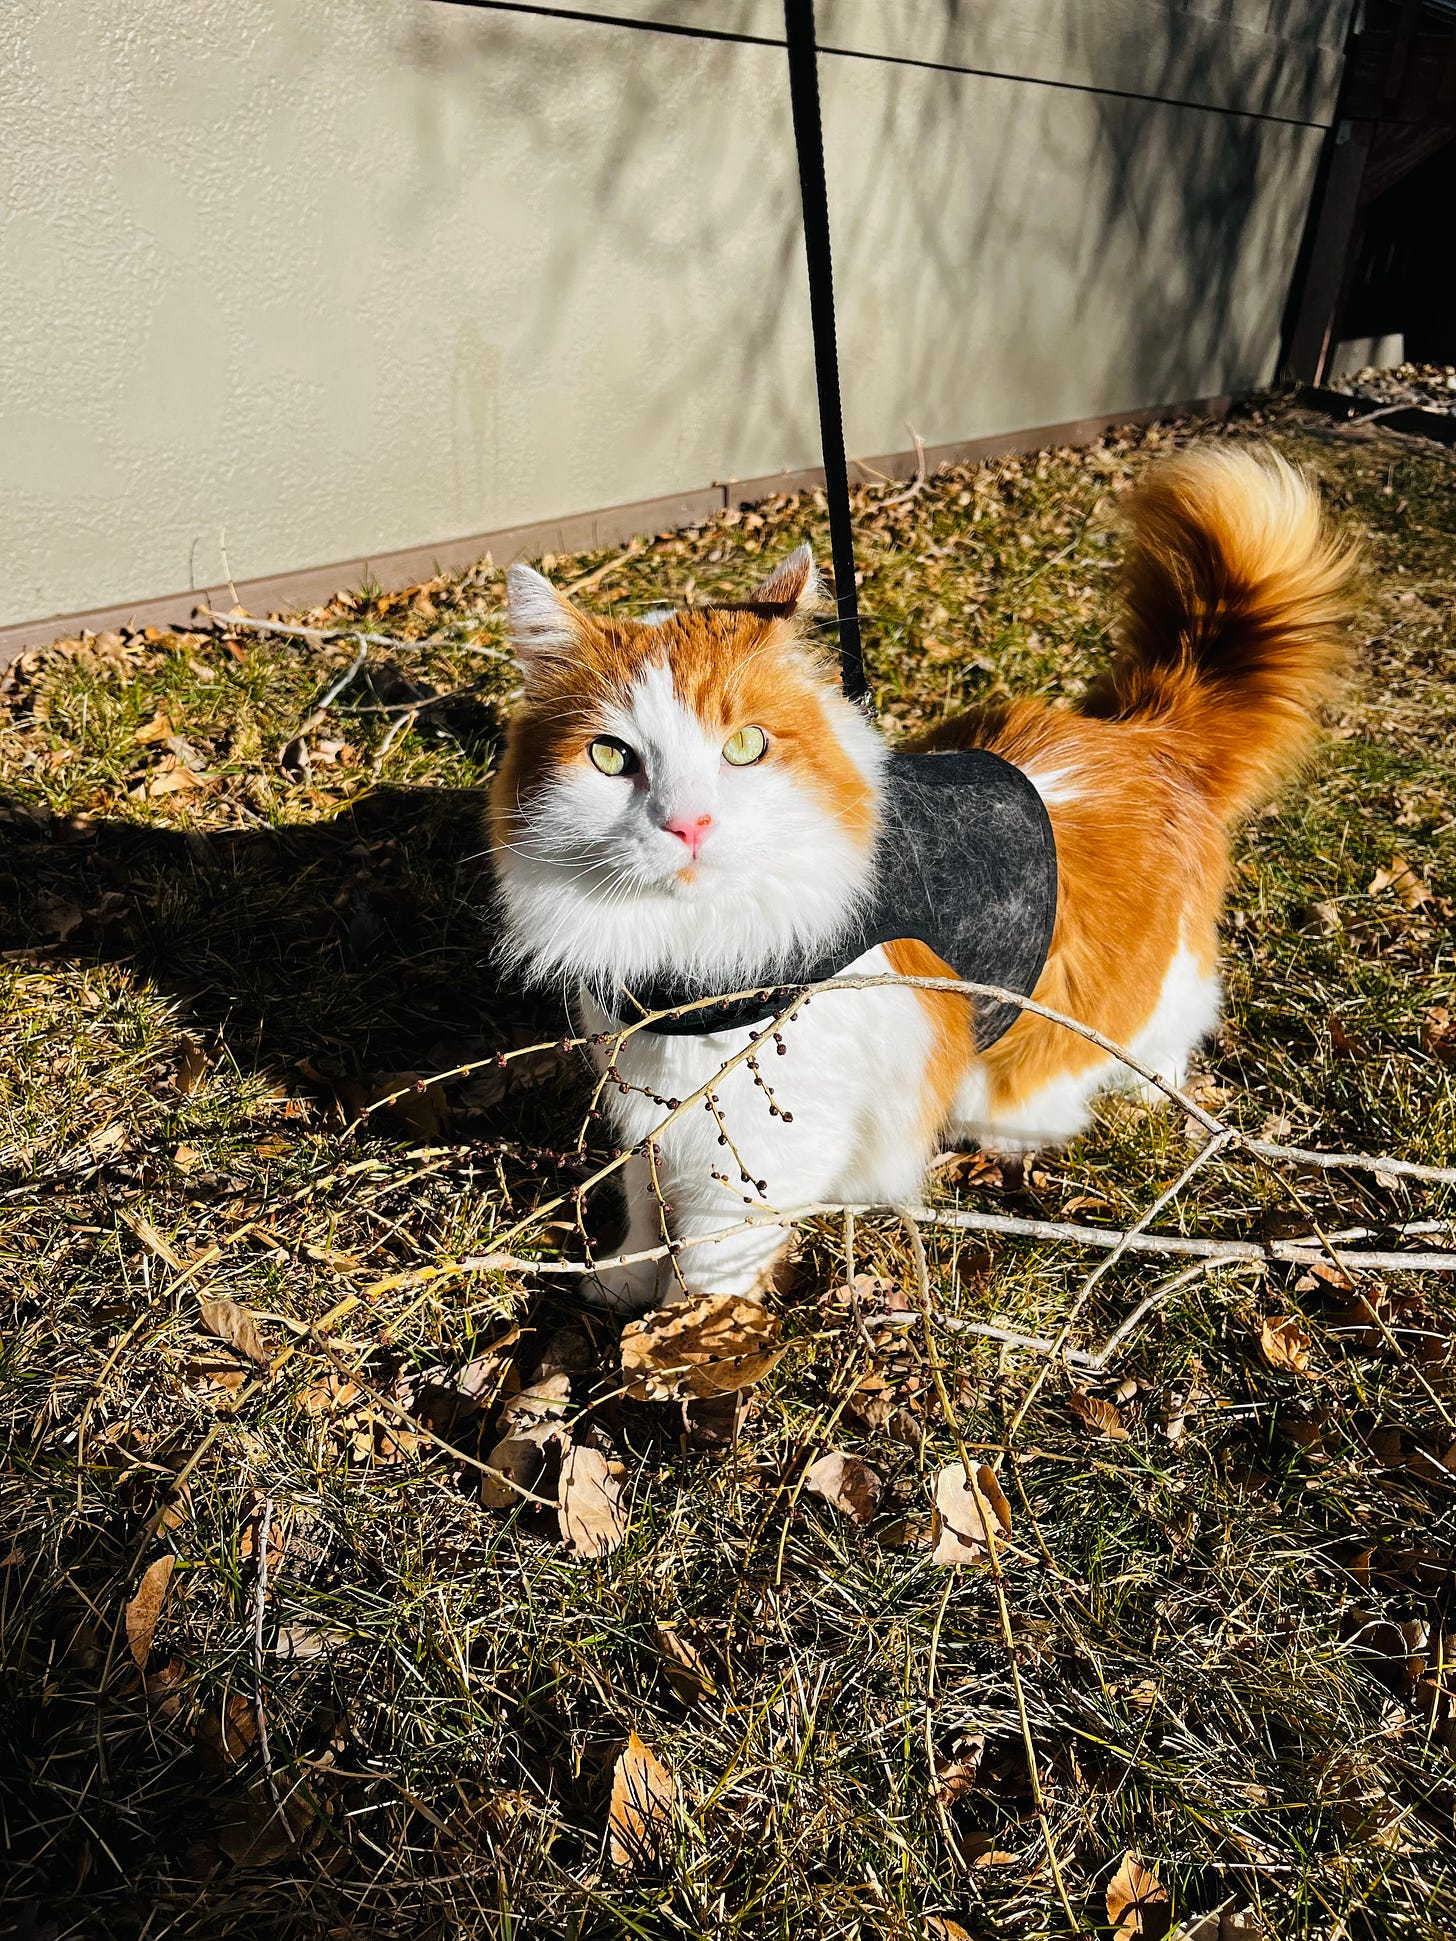 A handsome long-haired orange and white cat on a leash